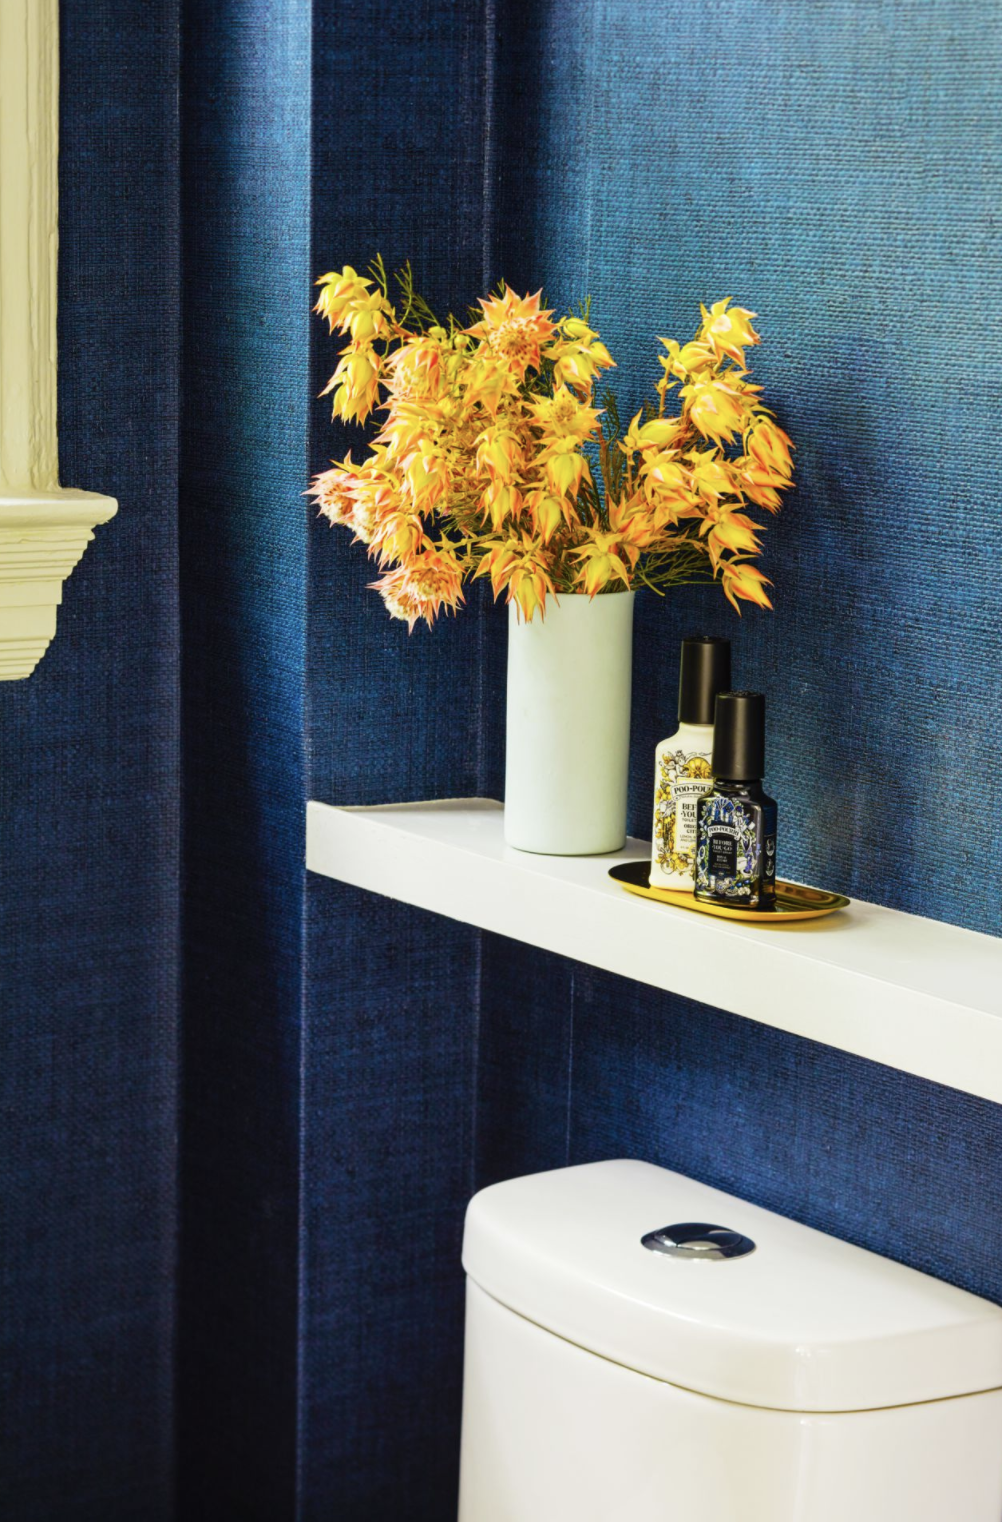 yellow and blue bathroom